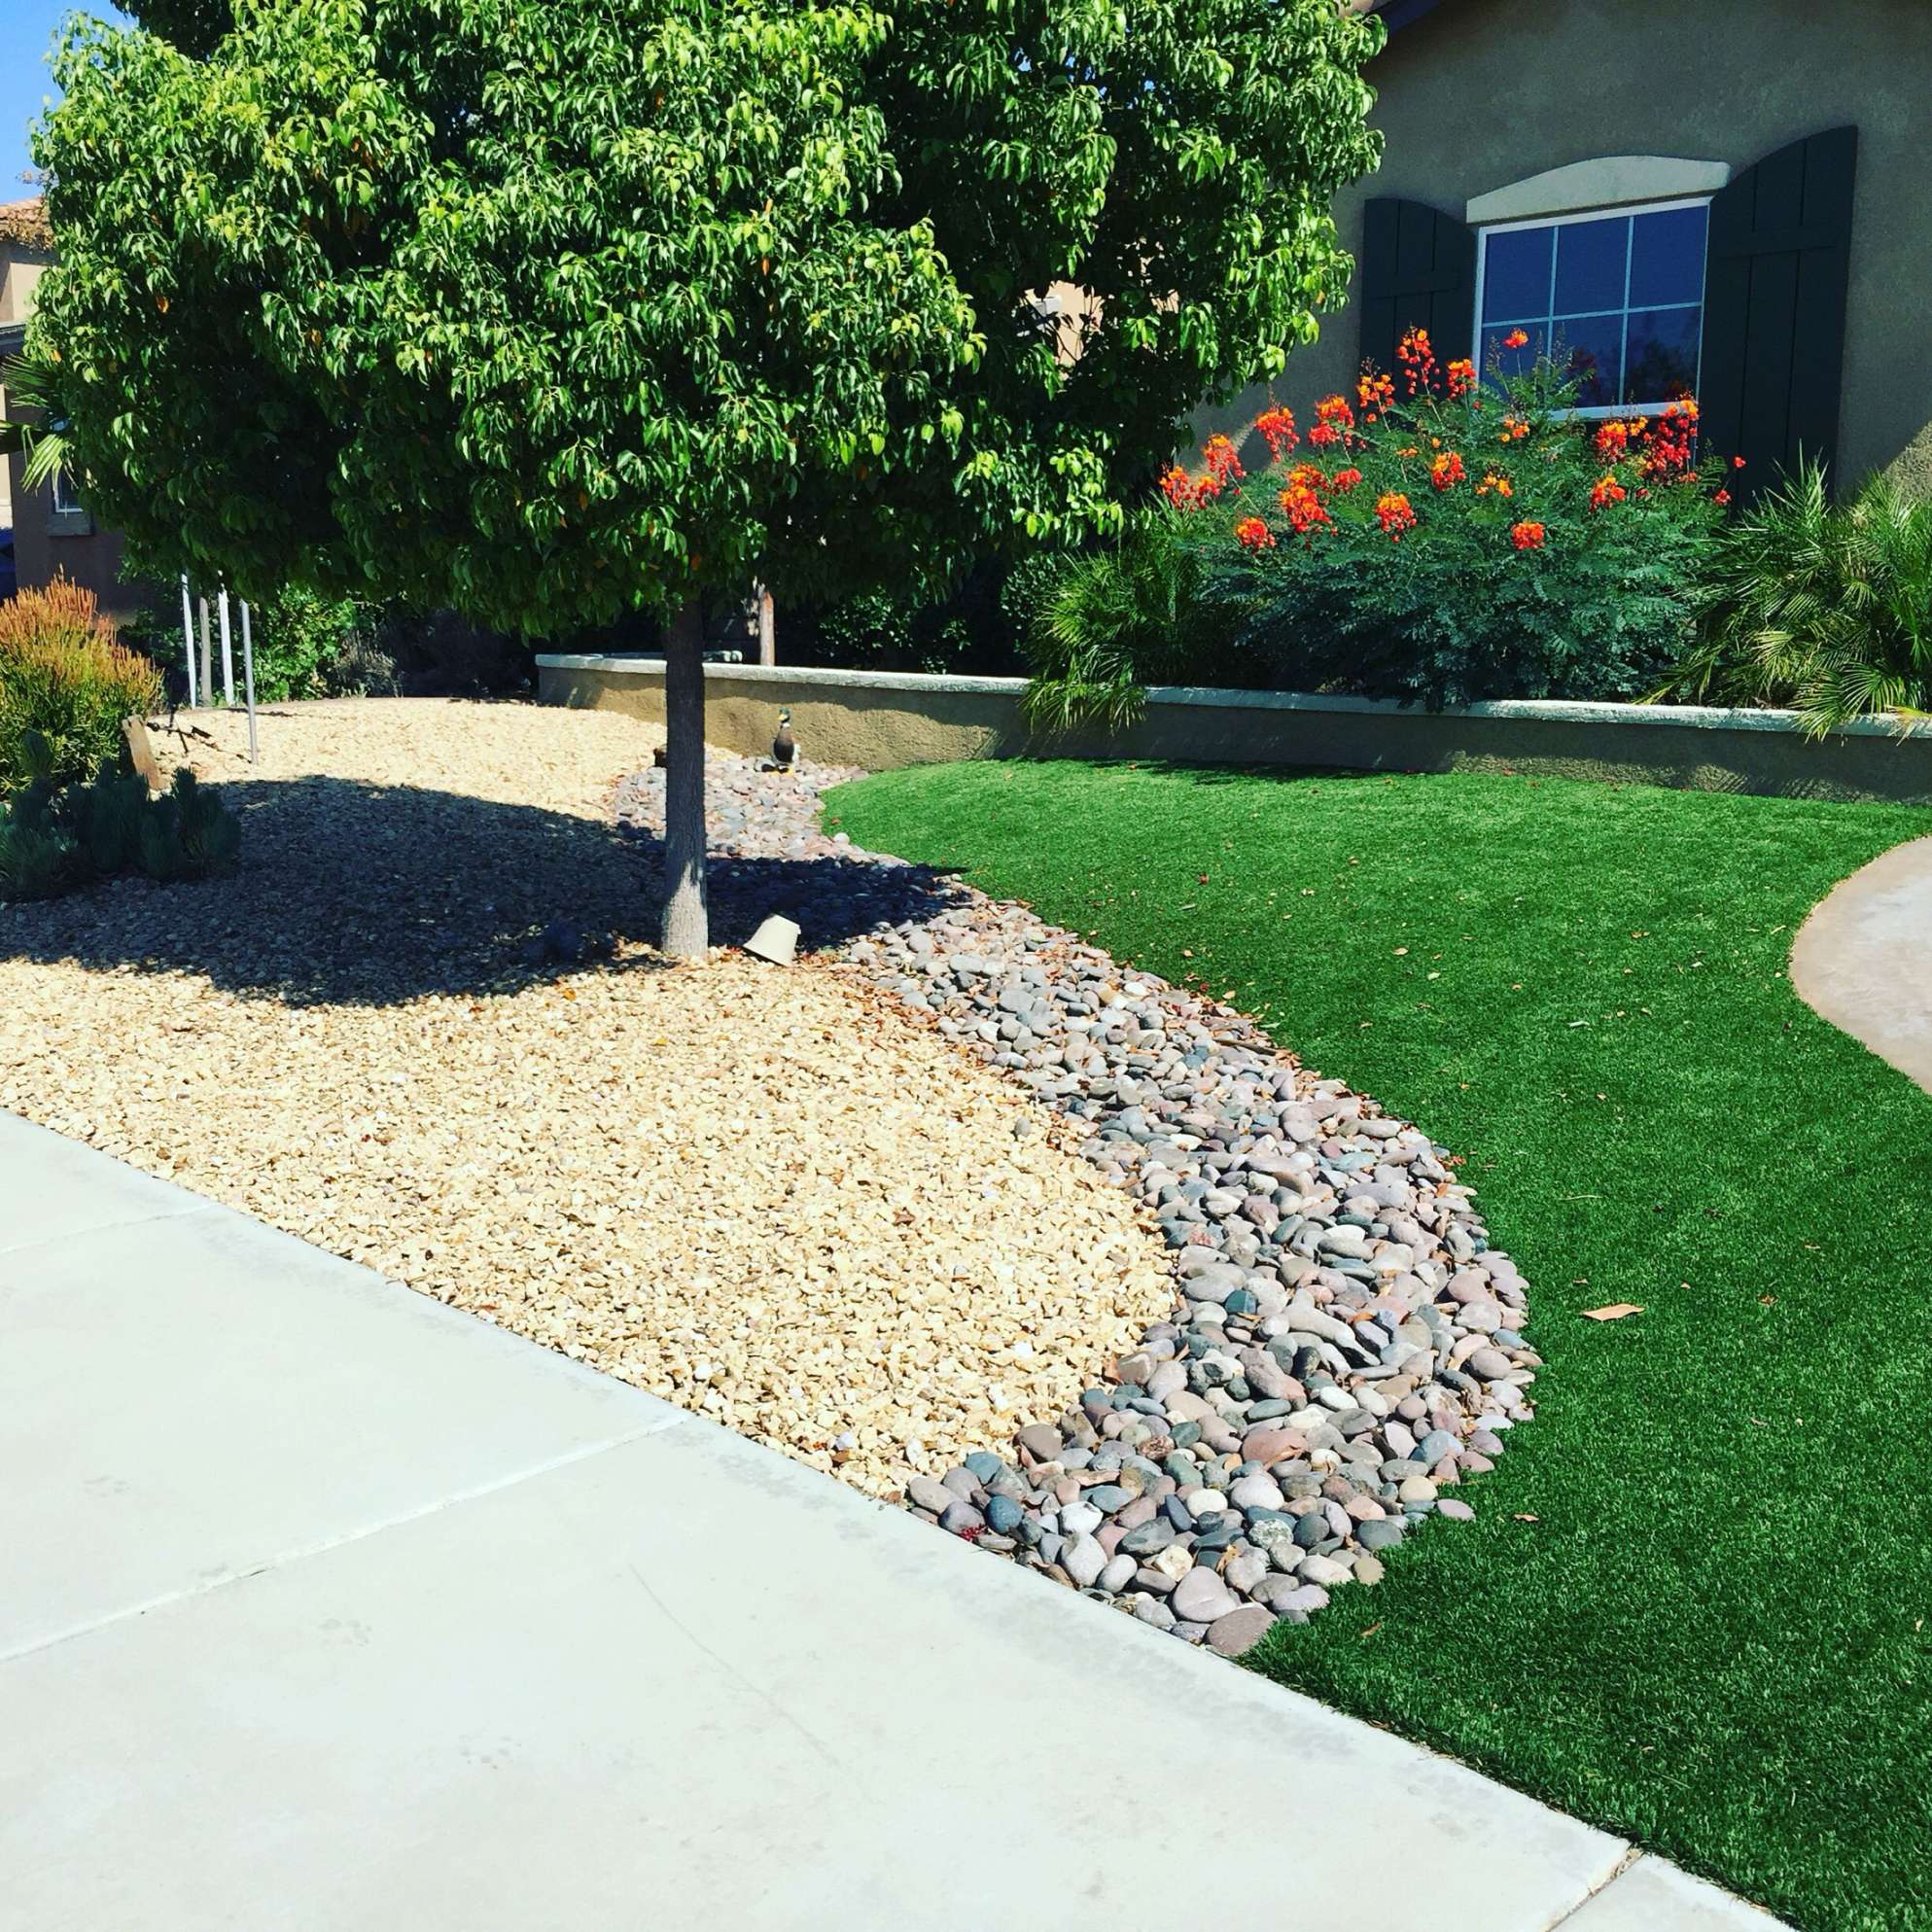 Artificial Turf and Rock Design for Front Yard Landscaping